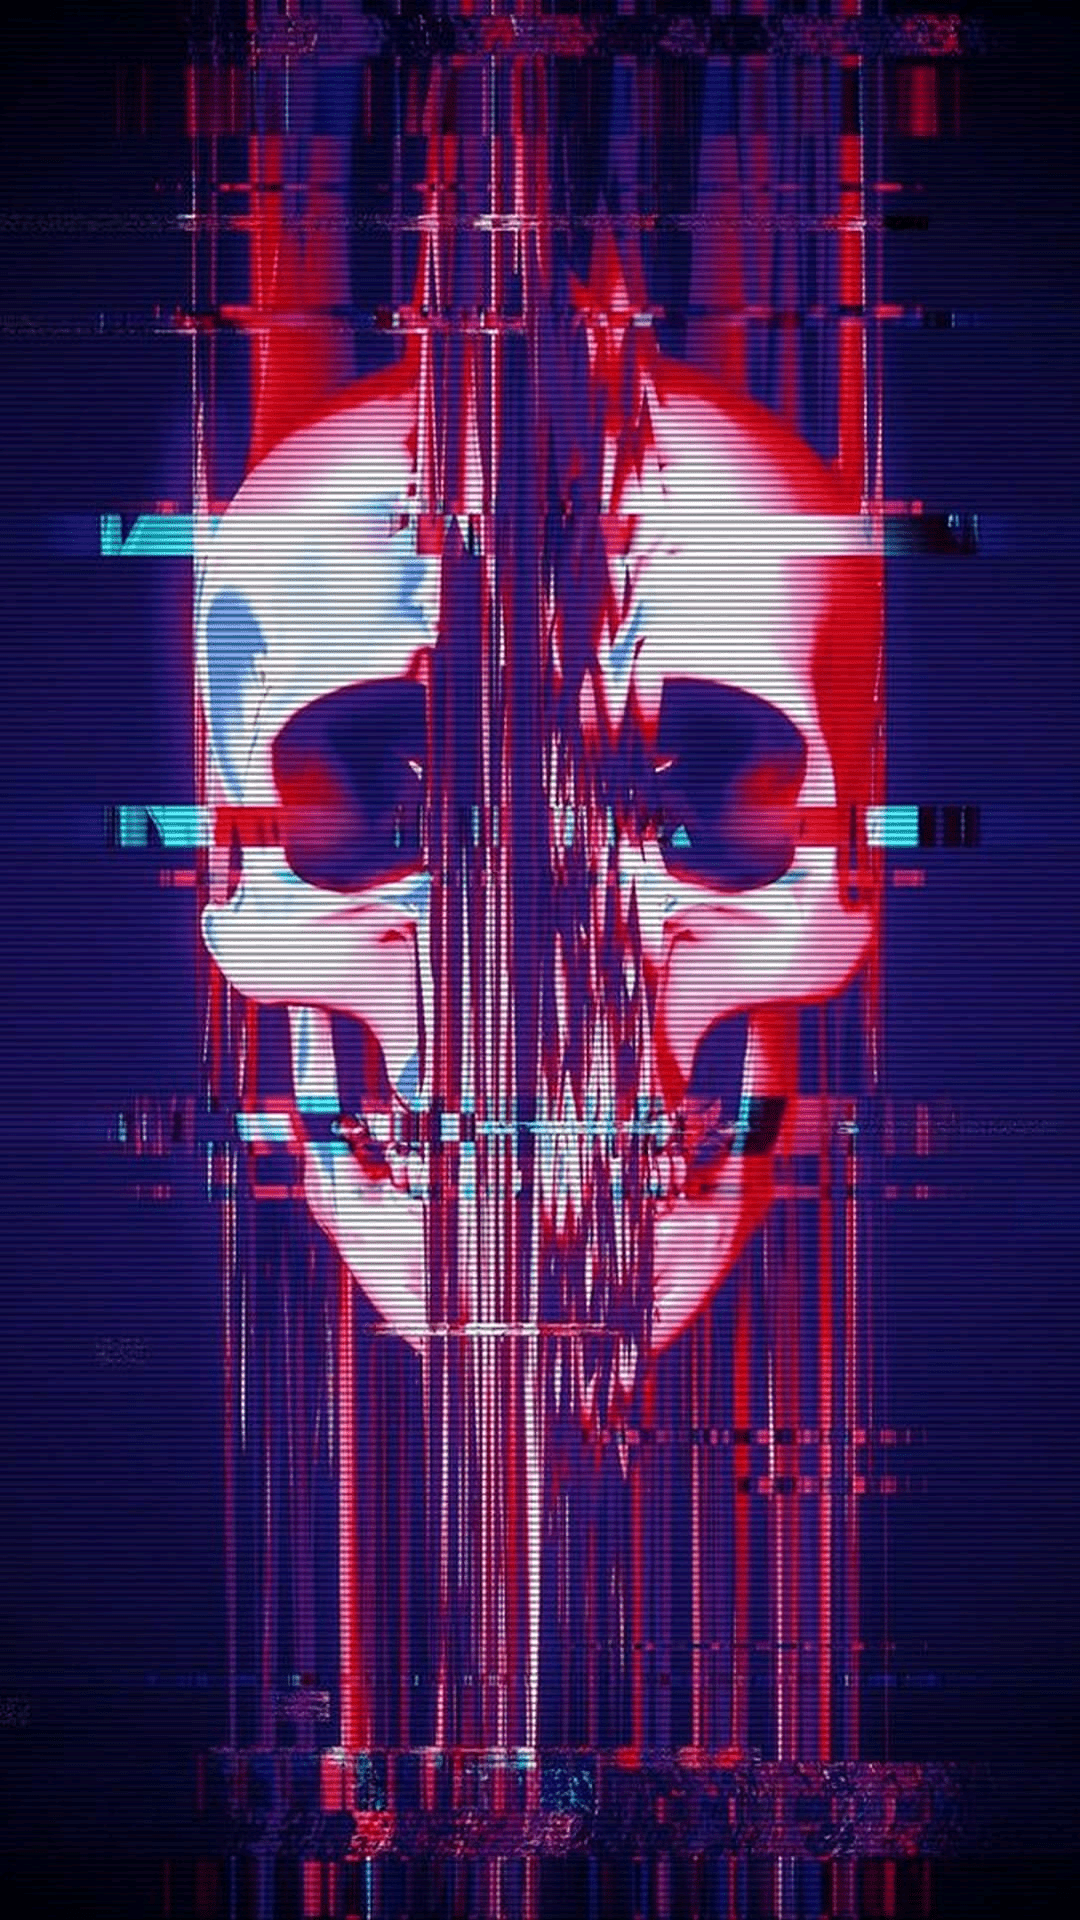 Glitch Art Skull iPhone Wallpaper with high-resolution 1080x1920 pixel. You can use this wallpaper for your iPhone 5, 6, 7, 8, X, XS, XR backgrounds, Mobile Screensaver, or iPad Lock Screen - Glitch, skull